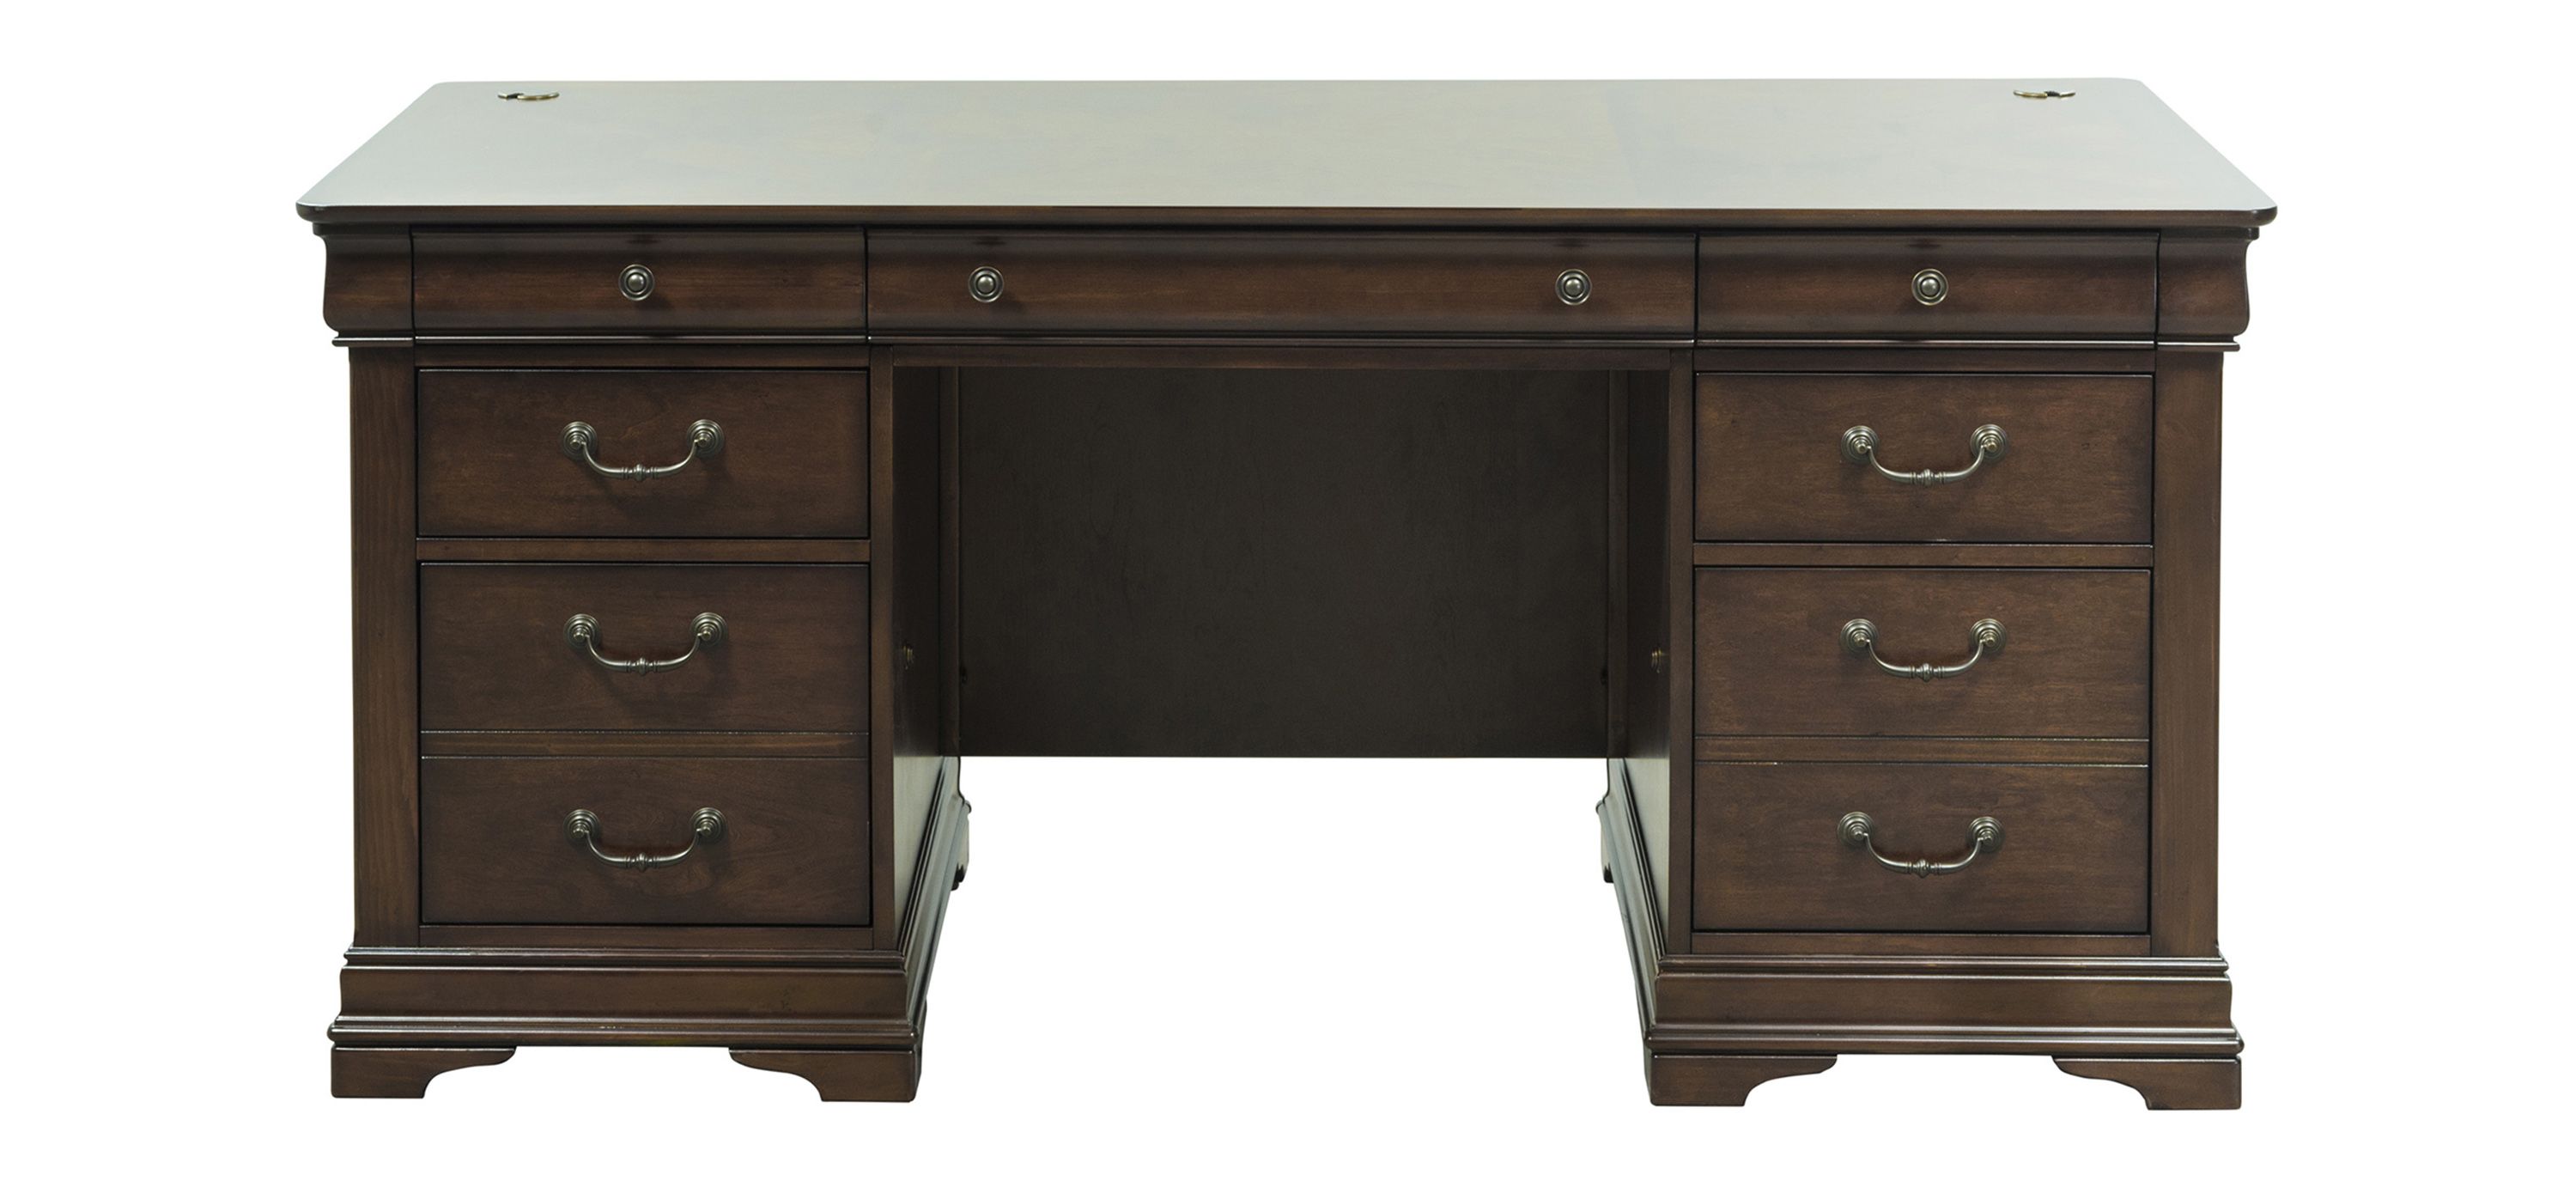 Chateau Valley Executive Desk